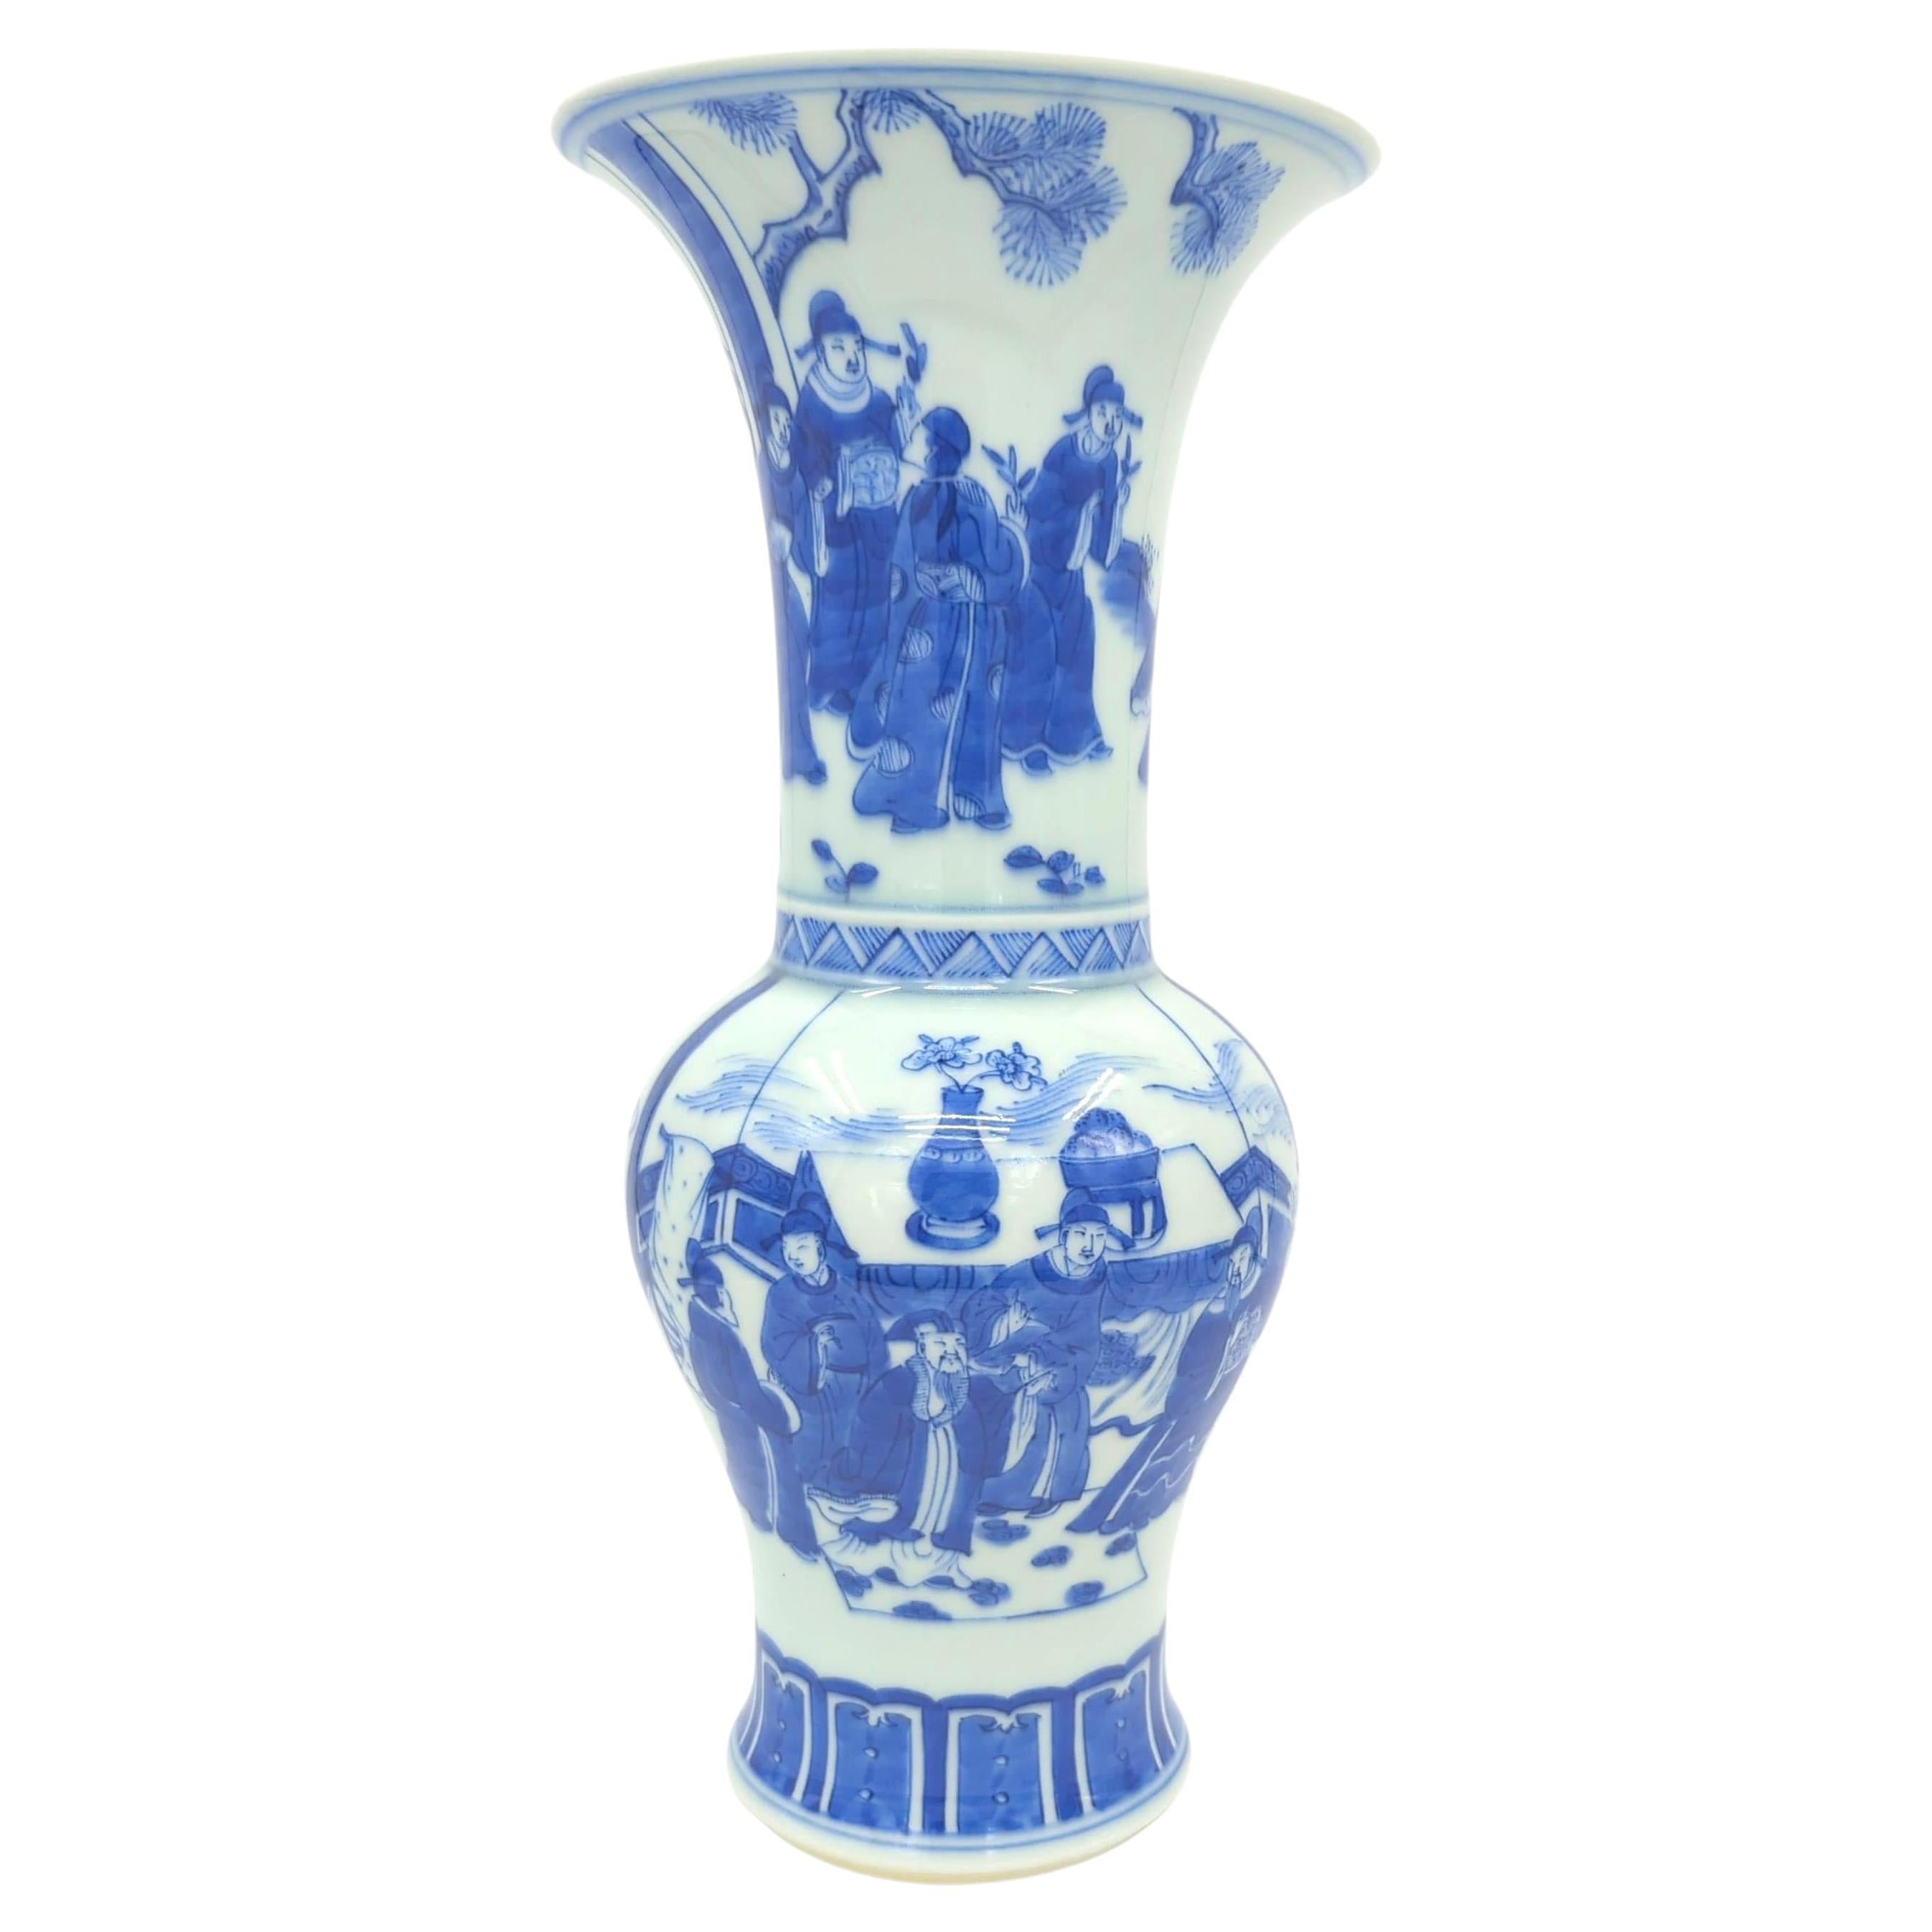 Antique Chinese Porcelain Blue & White Figural Gu Vase Late Qing R.O.C. 19/20c For Sale 3